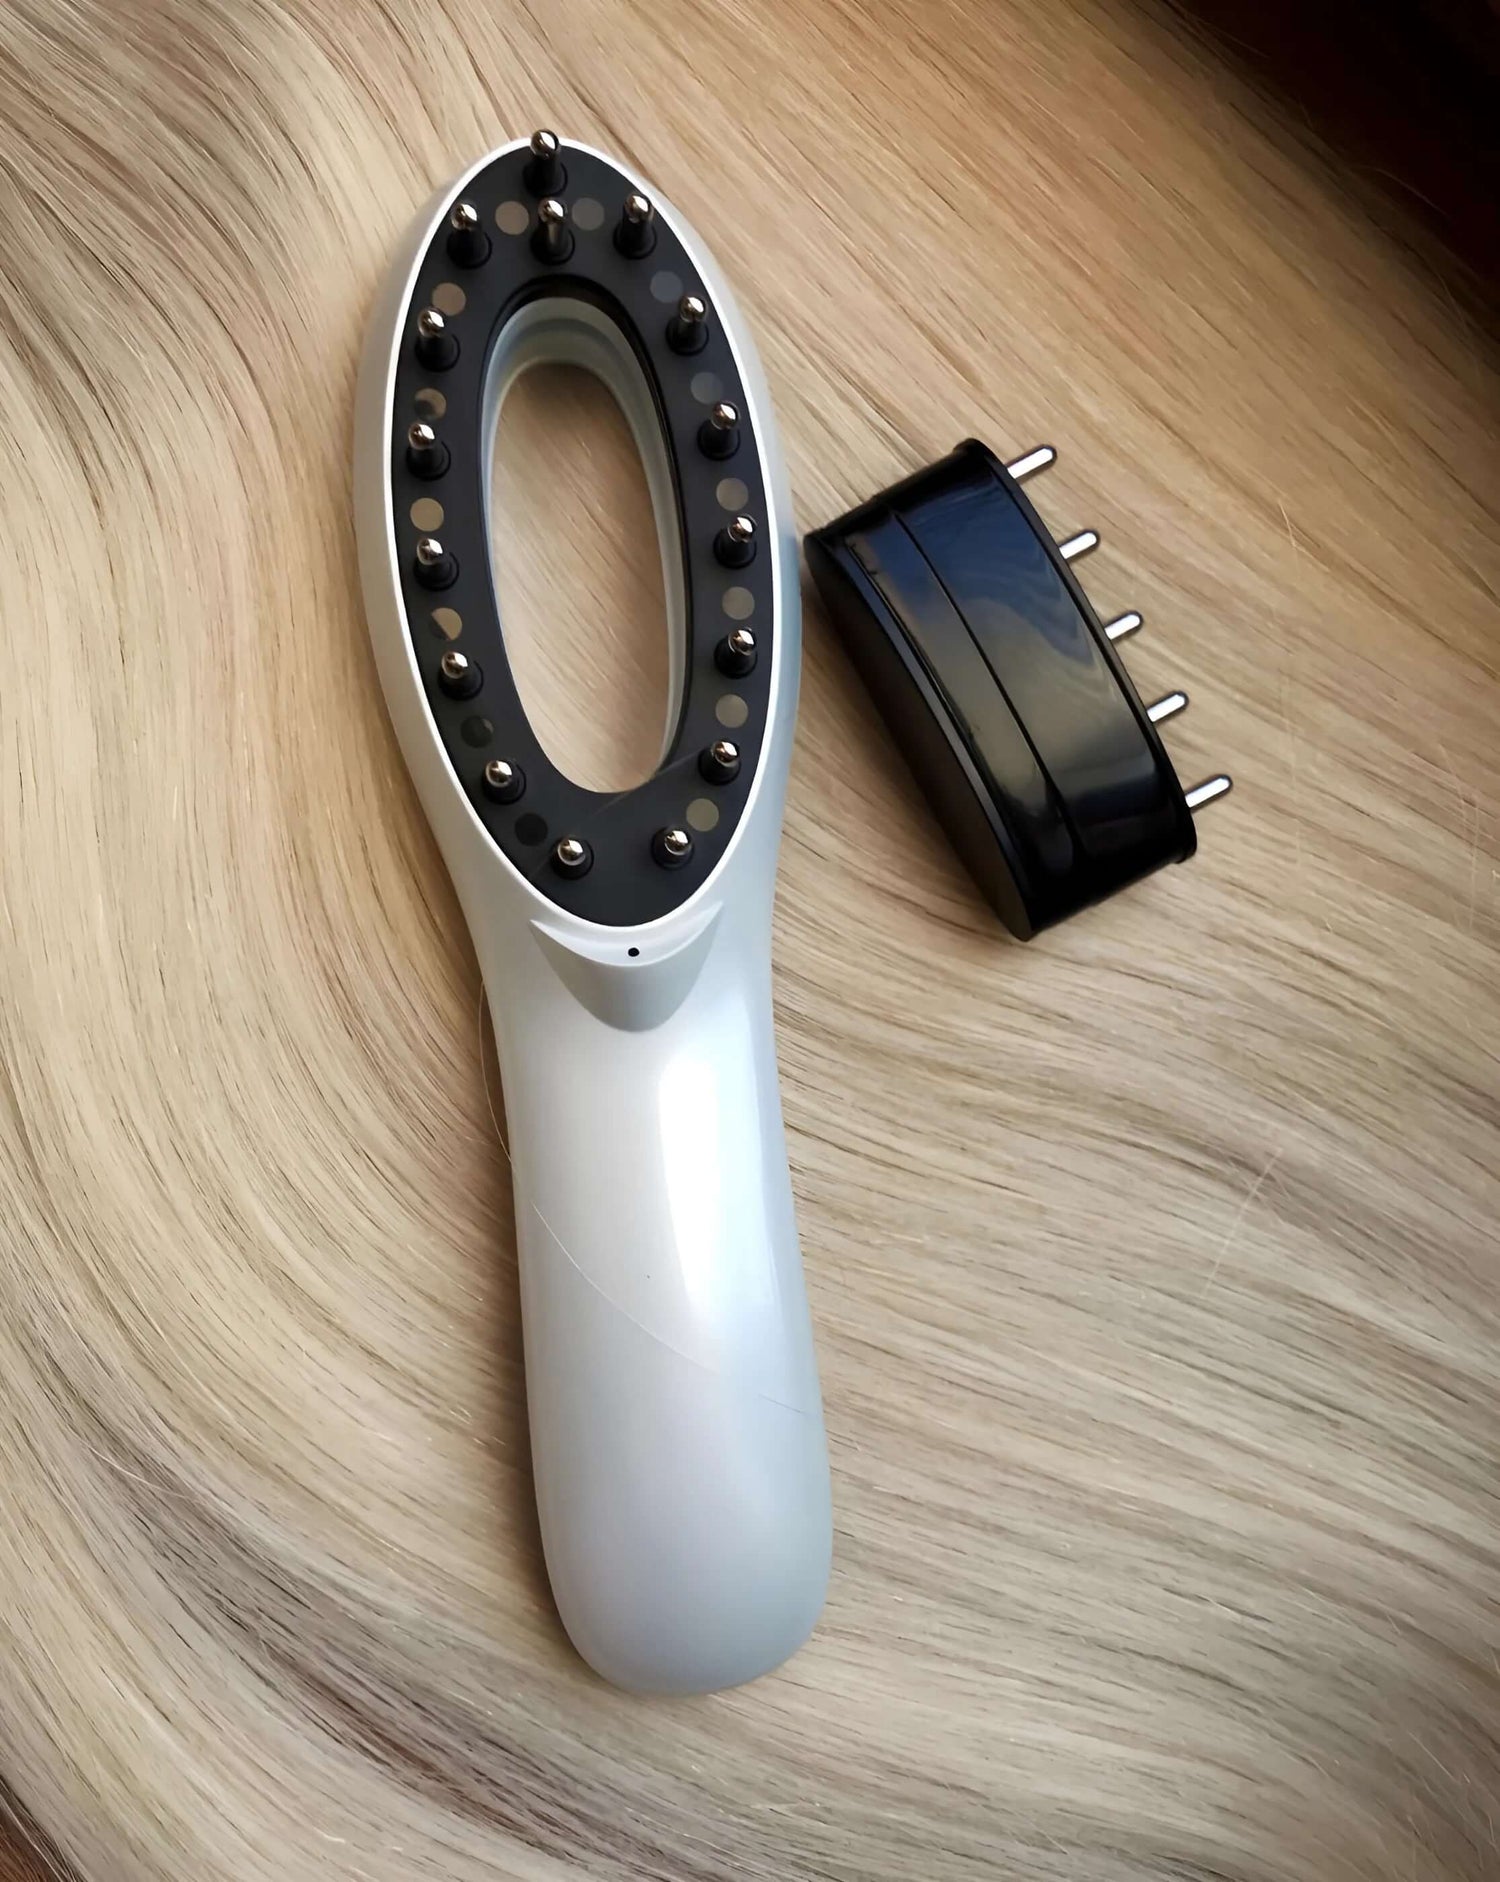 Hair care device serum automatic dispenser, do not apply nutrients by hand, use this eletric massage comb instead